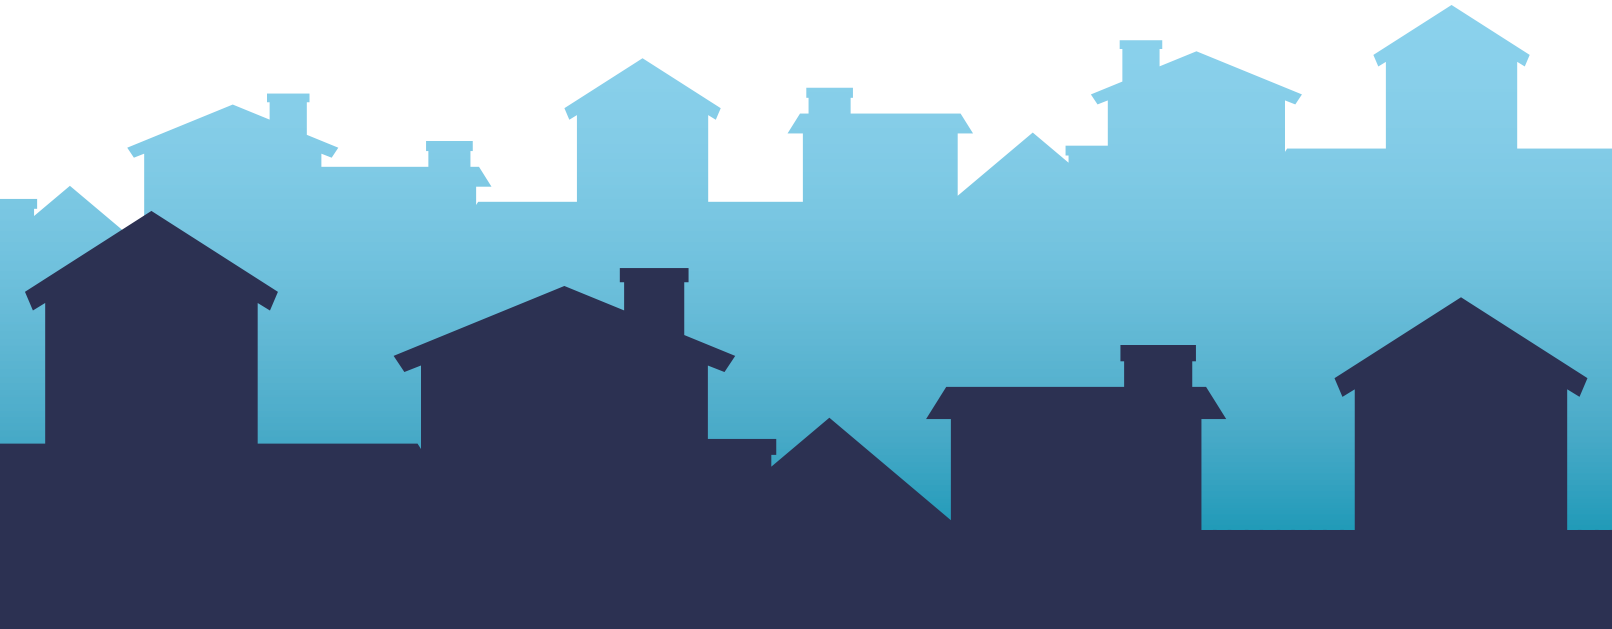 Silhouette graphic of houses skyline